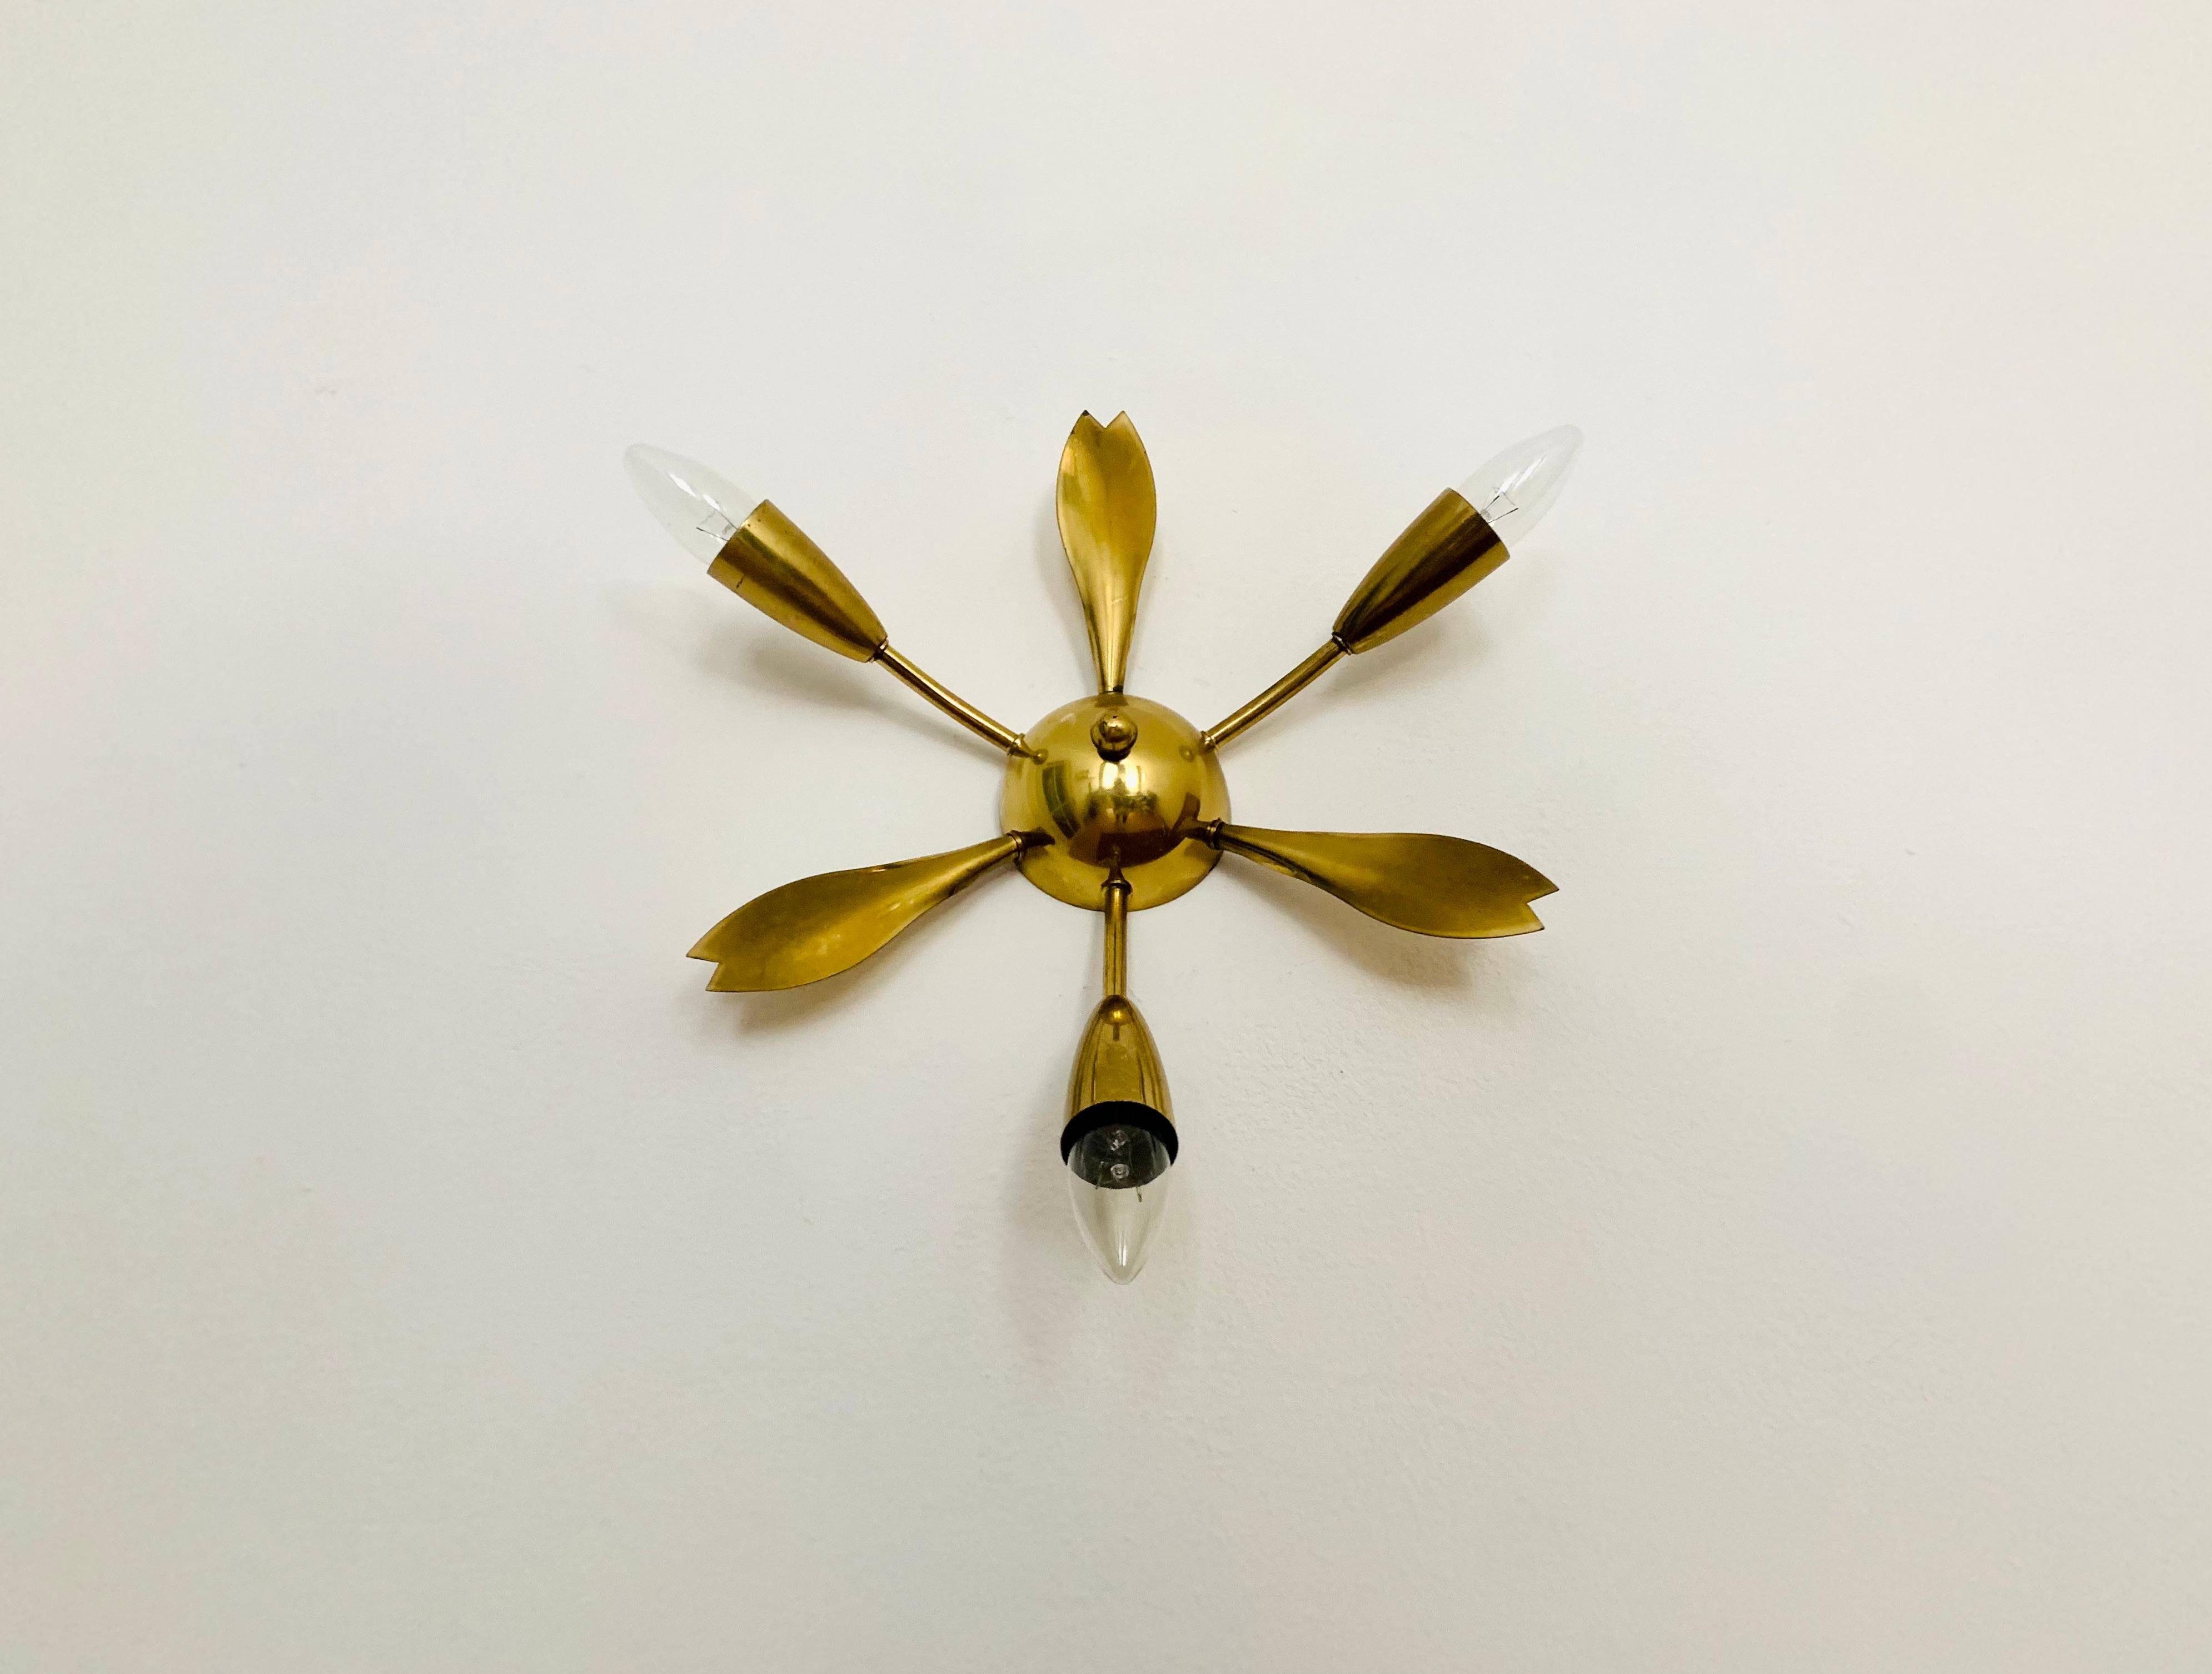 Exceptionally beautiful Italian wall or ceiling lamp from the 1950s.
Very decorative and of high quality.
Wonderful design and an asset to any home.

Condition:

Very good vintage condition with slight signs of wear consistent with age.
The metal